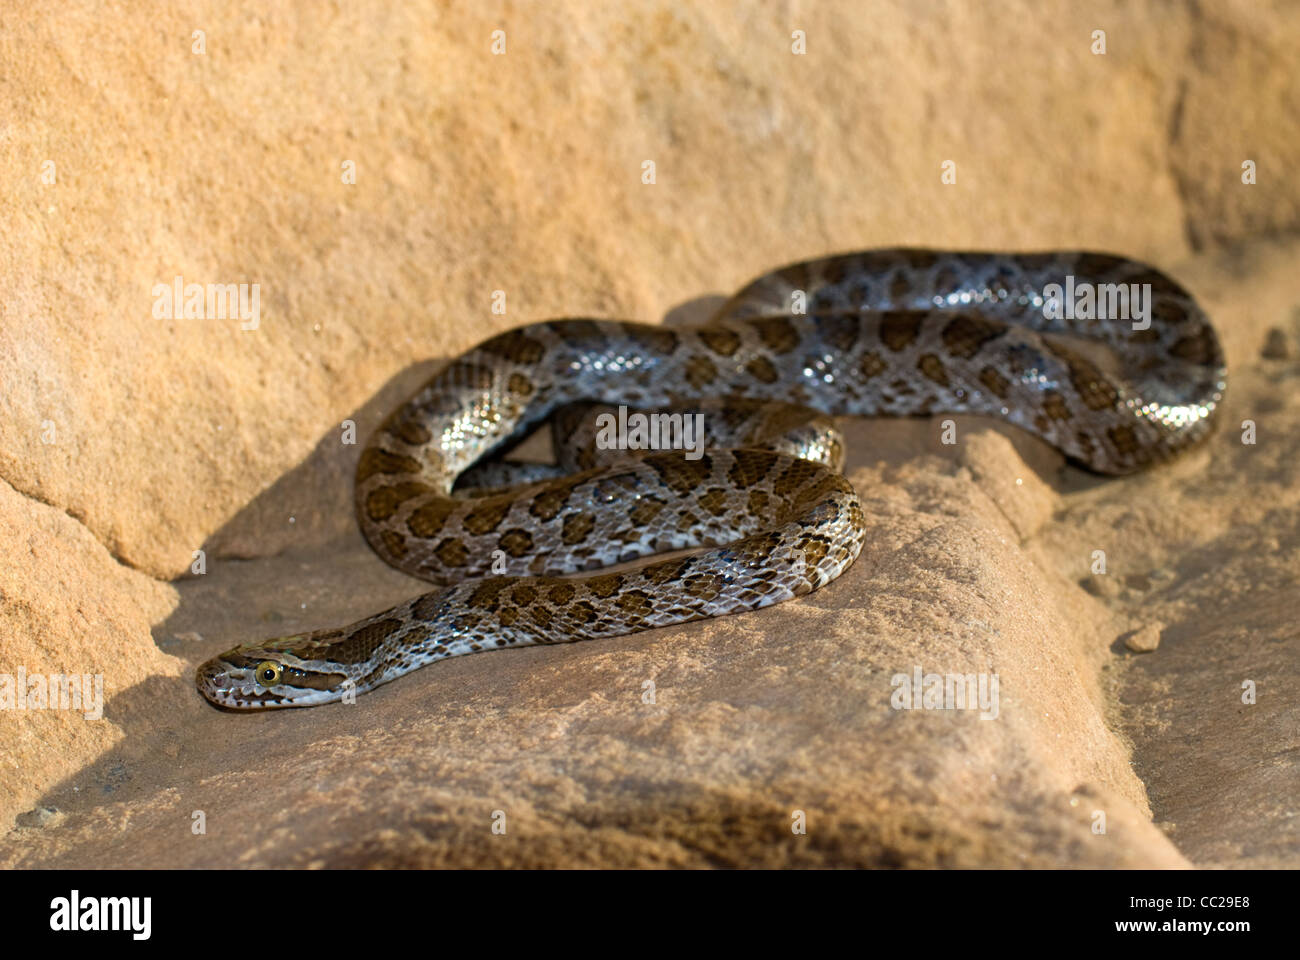 Great Plains Ratsnake, (Pantherophis Emoryi), San Miguel County, New Mexico, Vereinigte Staaten Stockfoto